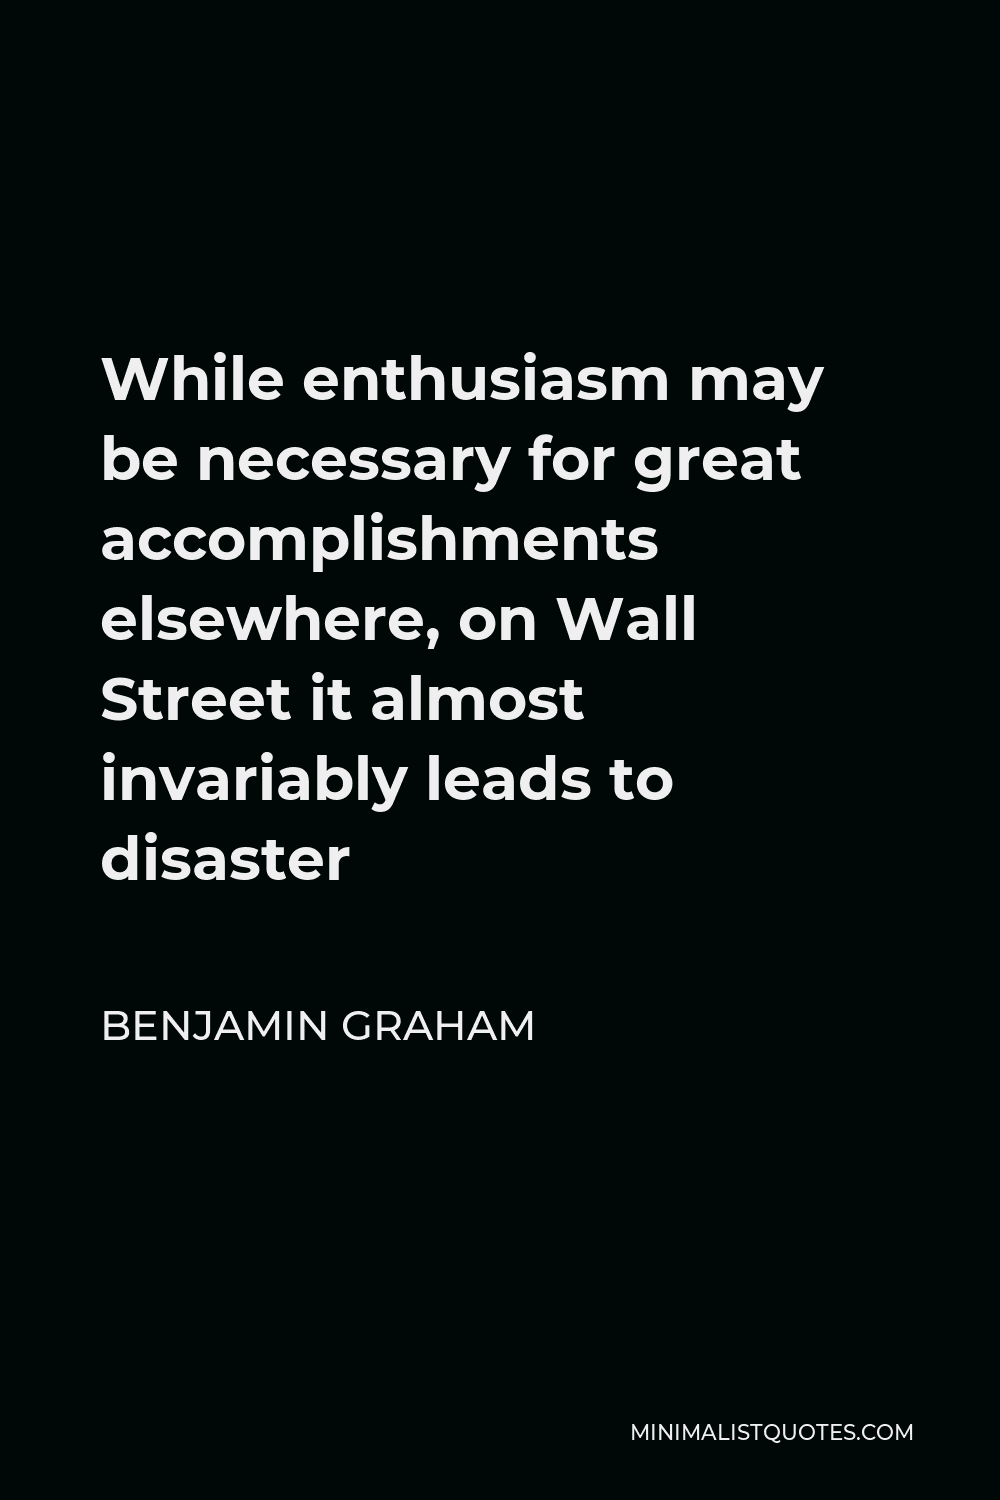 Benjamin Graham Quote - While enthusiasm may be necessary for great accomplishments elsewhere, on Wall Street it almost invariably leads to disaster